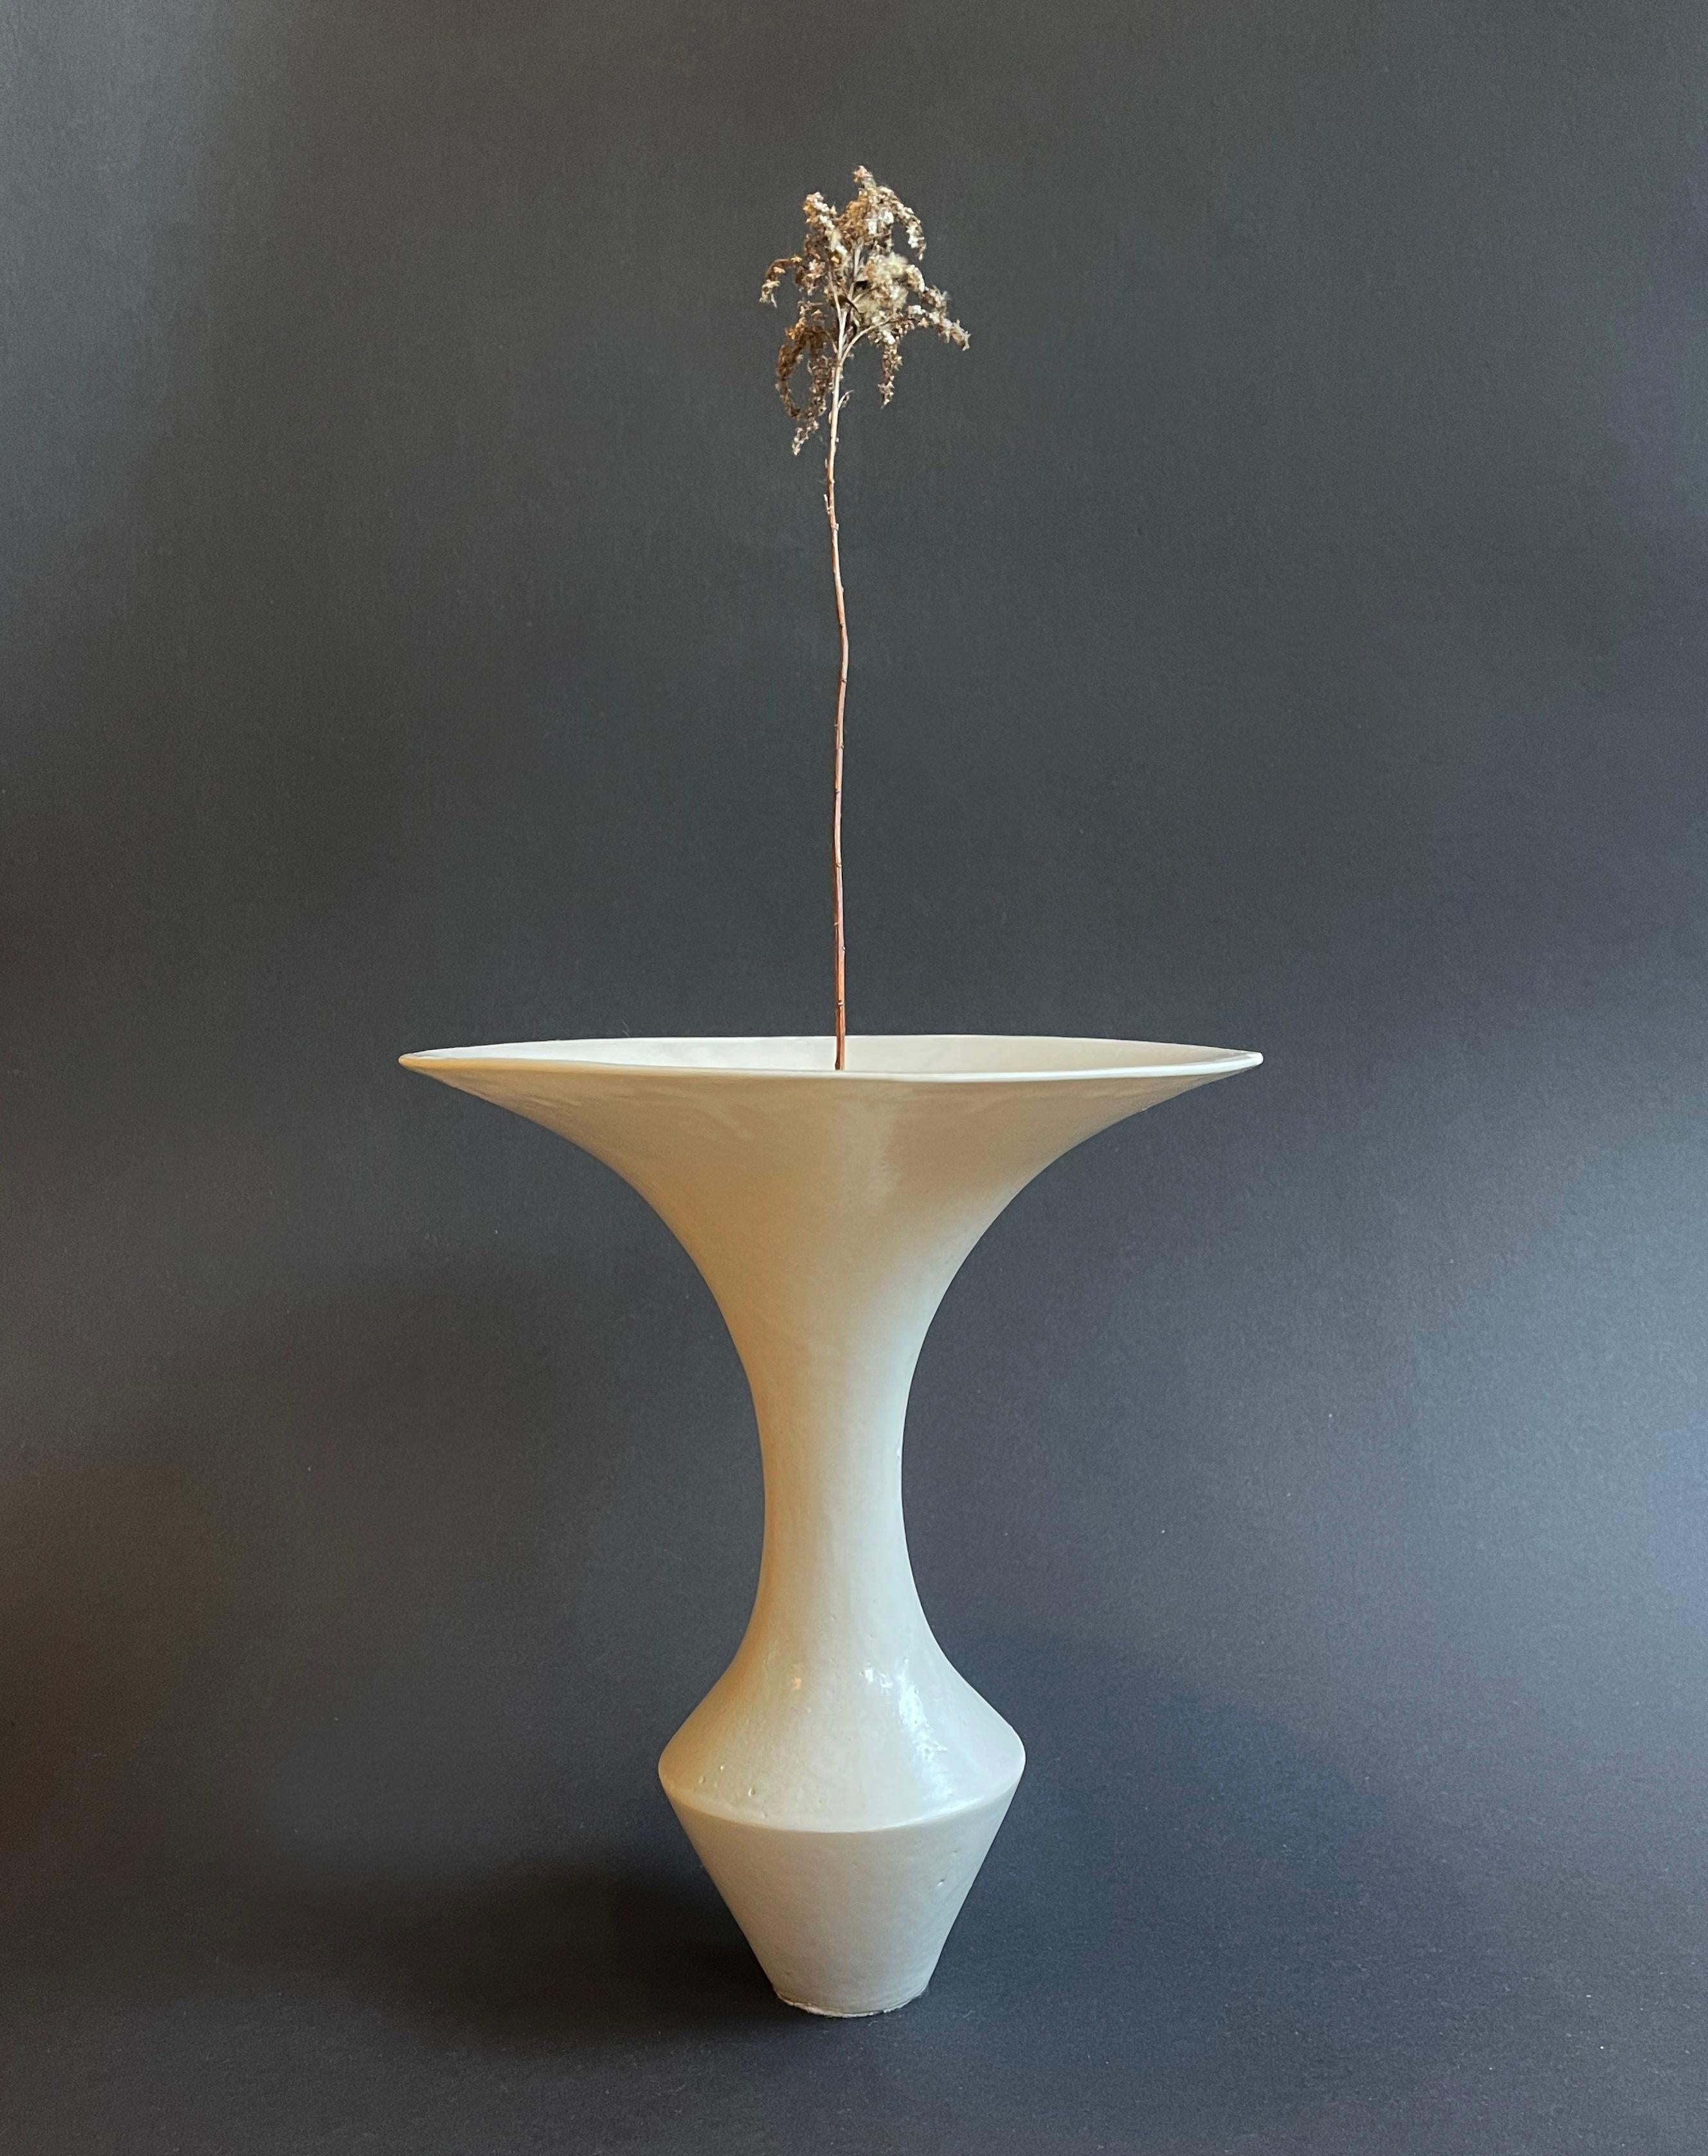 Hand-Crafted Studio Ceramic White Funnel Ikebana Vase, 1970s - 1980s, Japanese Vibe, Germany  For Sale